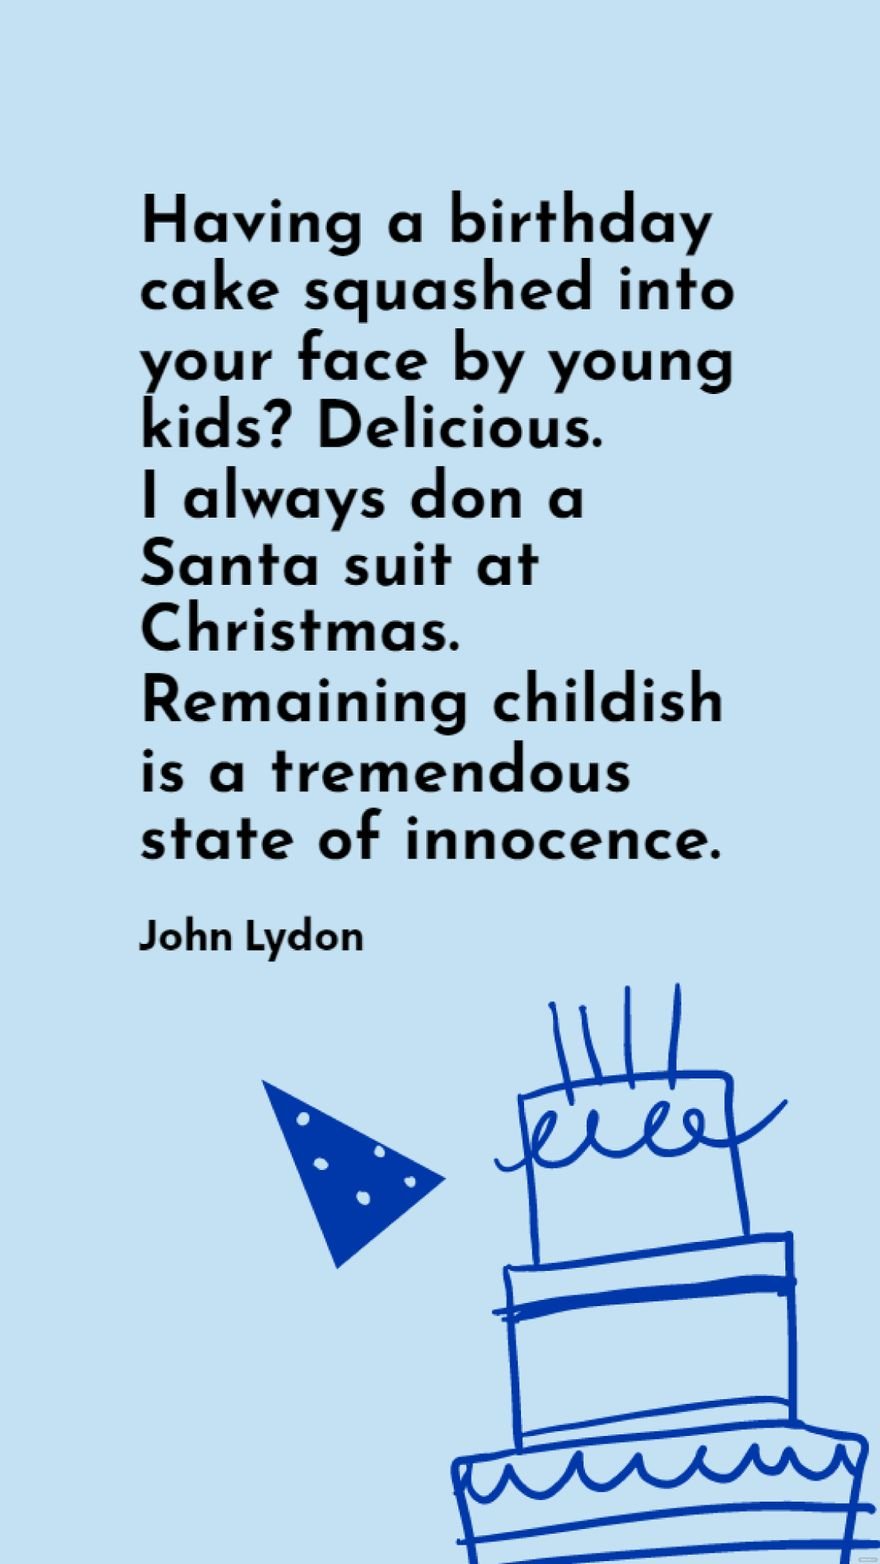 Free John Lydon - Having a birthday cake squashed into your face by young kids? Delicious. I always don a Santa suit at Christmas. Remaining childish is a tremendous state of innocence. in JPG